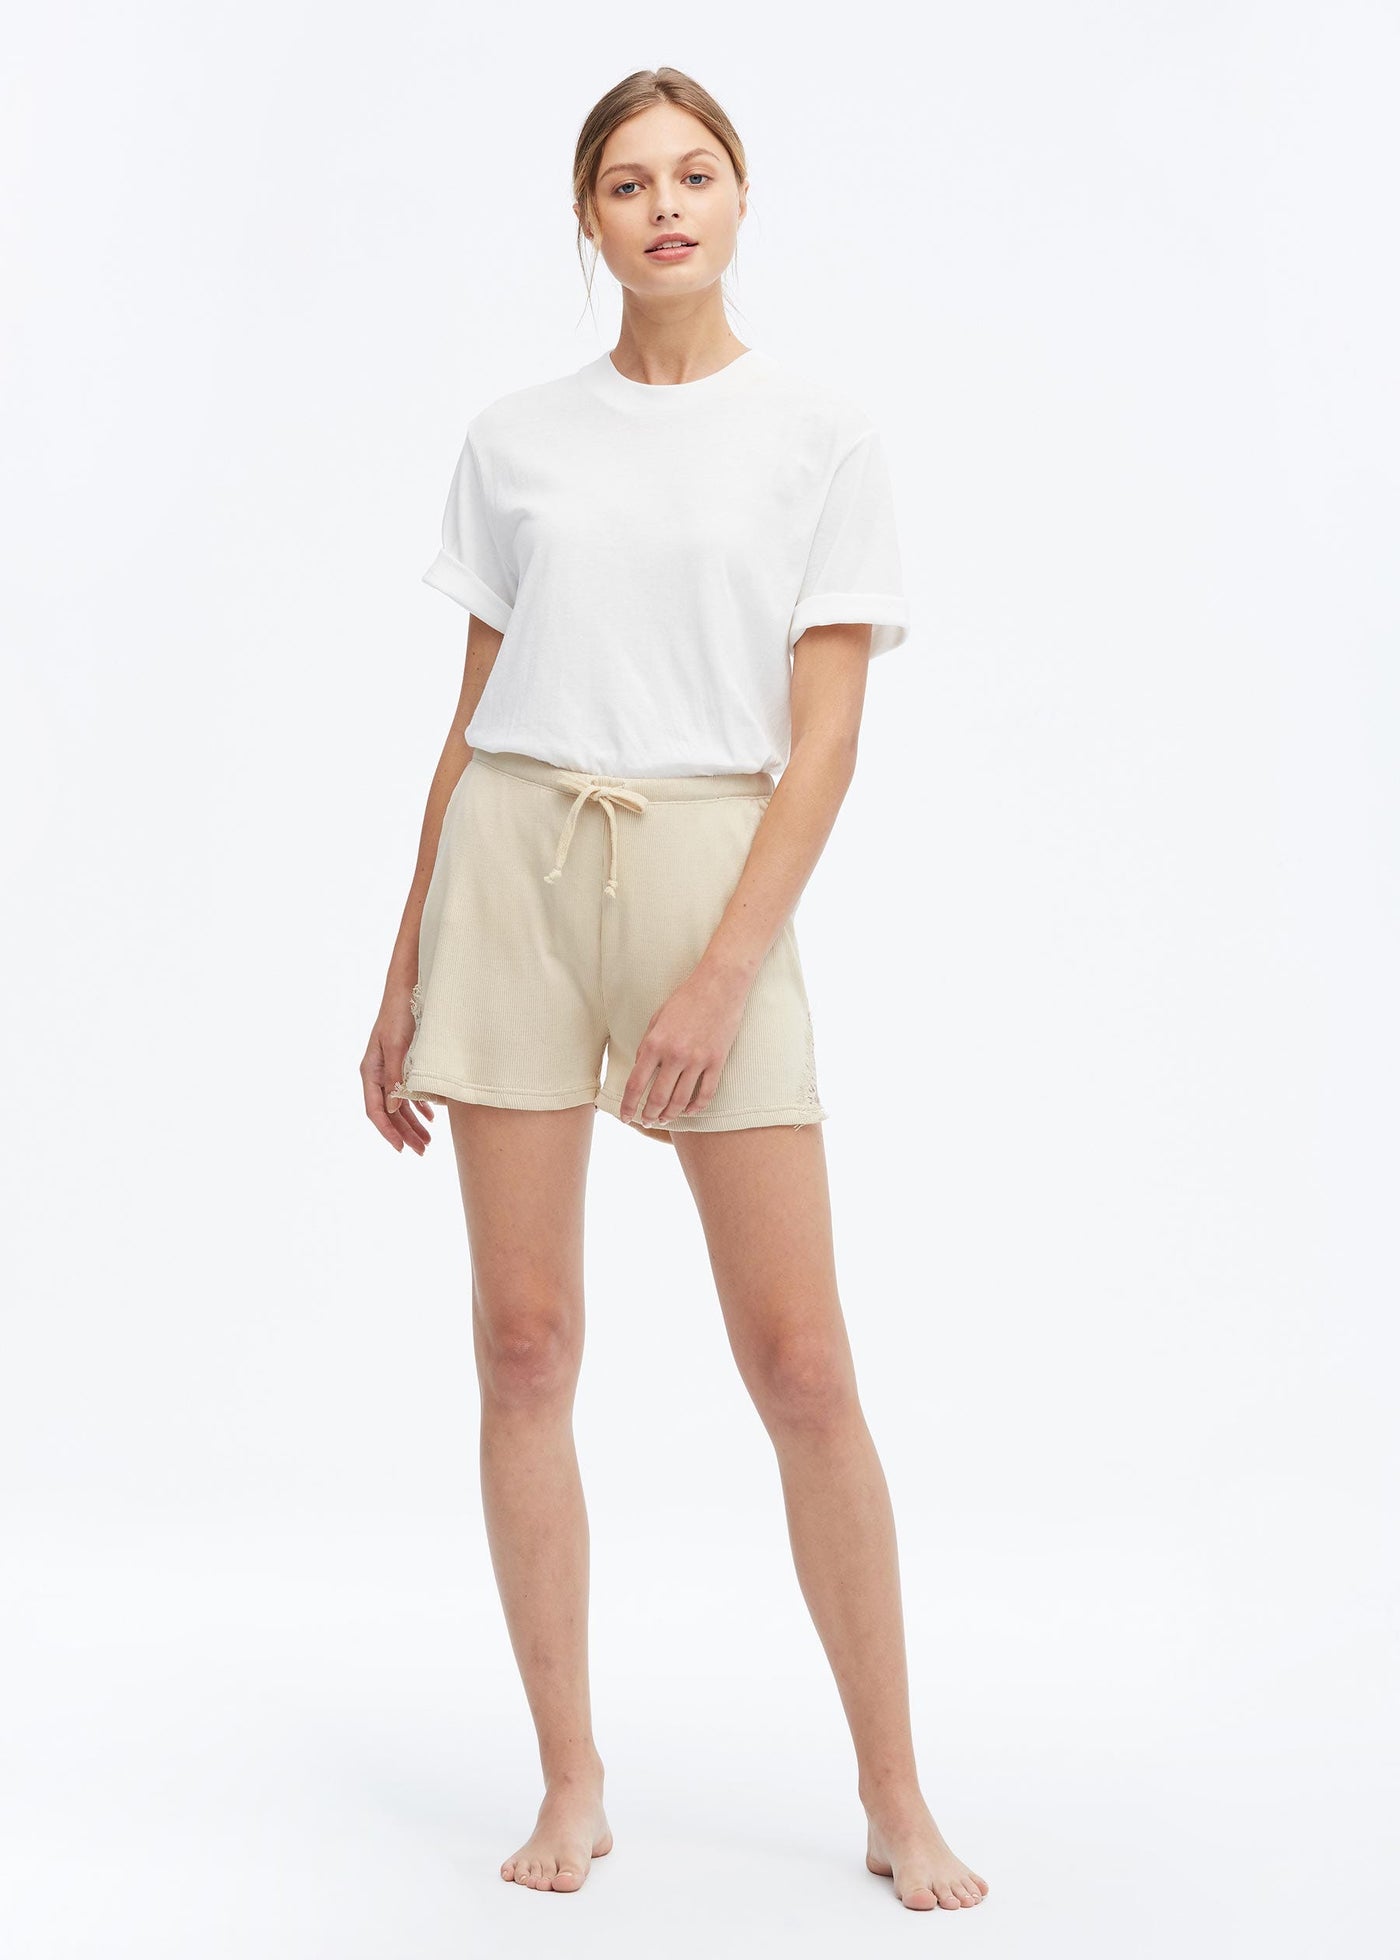 Casual Sleep Shorts For Women Pale Beige LILYSILK Factory